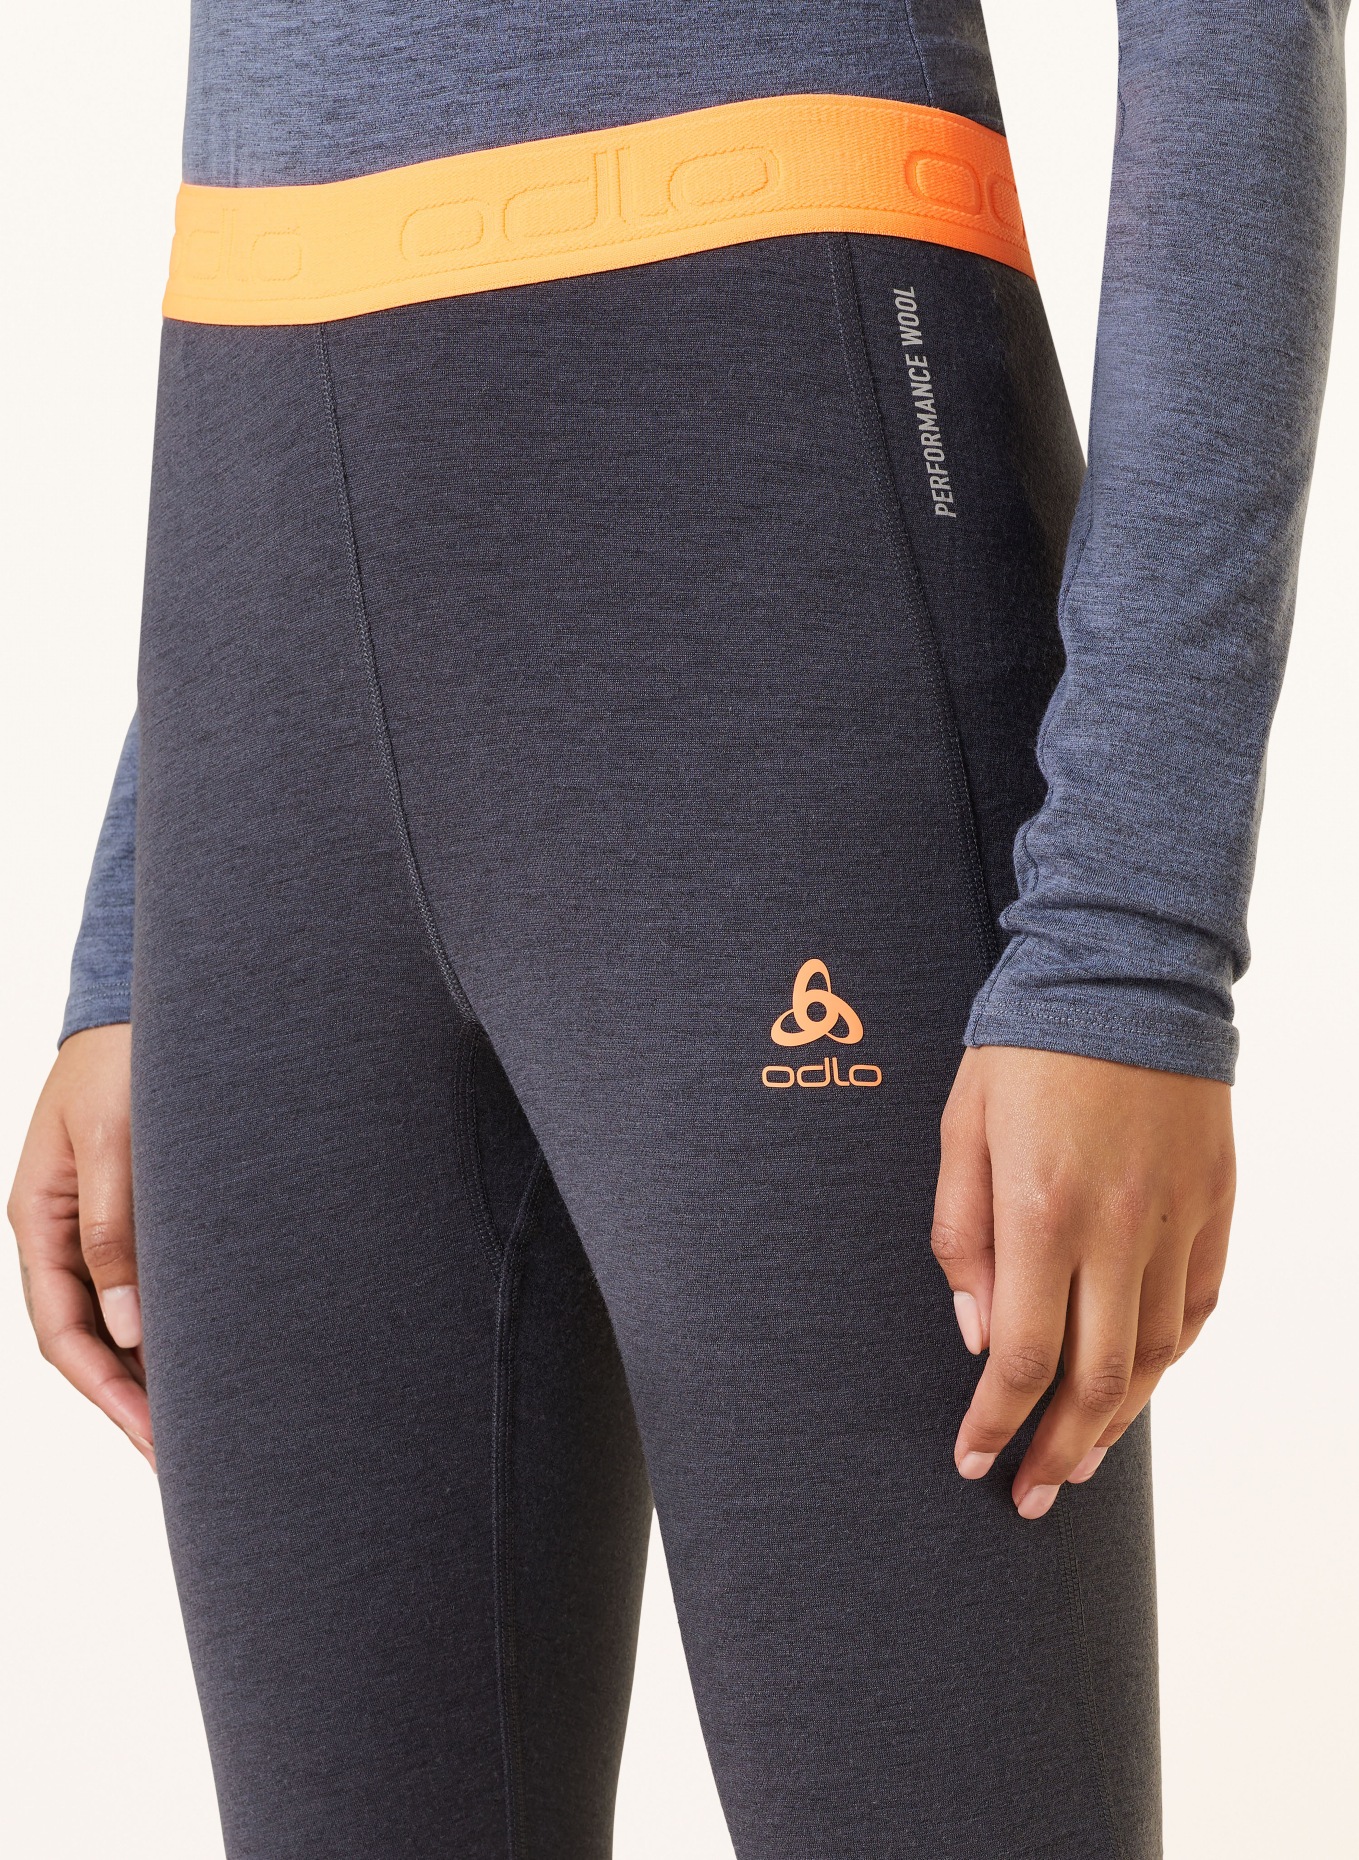 odlo Functional baselayer trousers REVELSTOKE PERFORMANCE with cropped leg length, Color: DARK GRAY (Image 5)